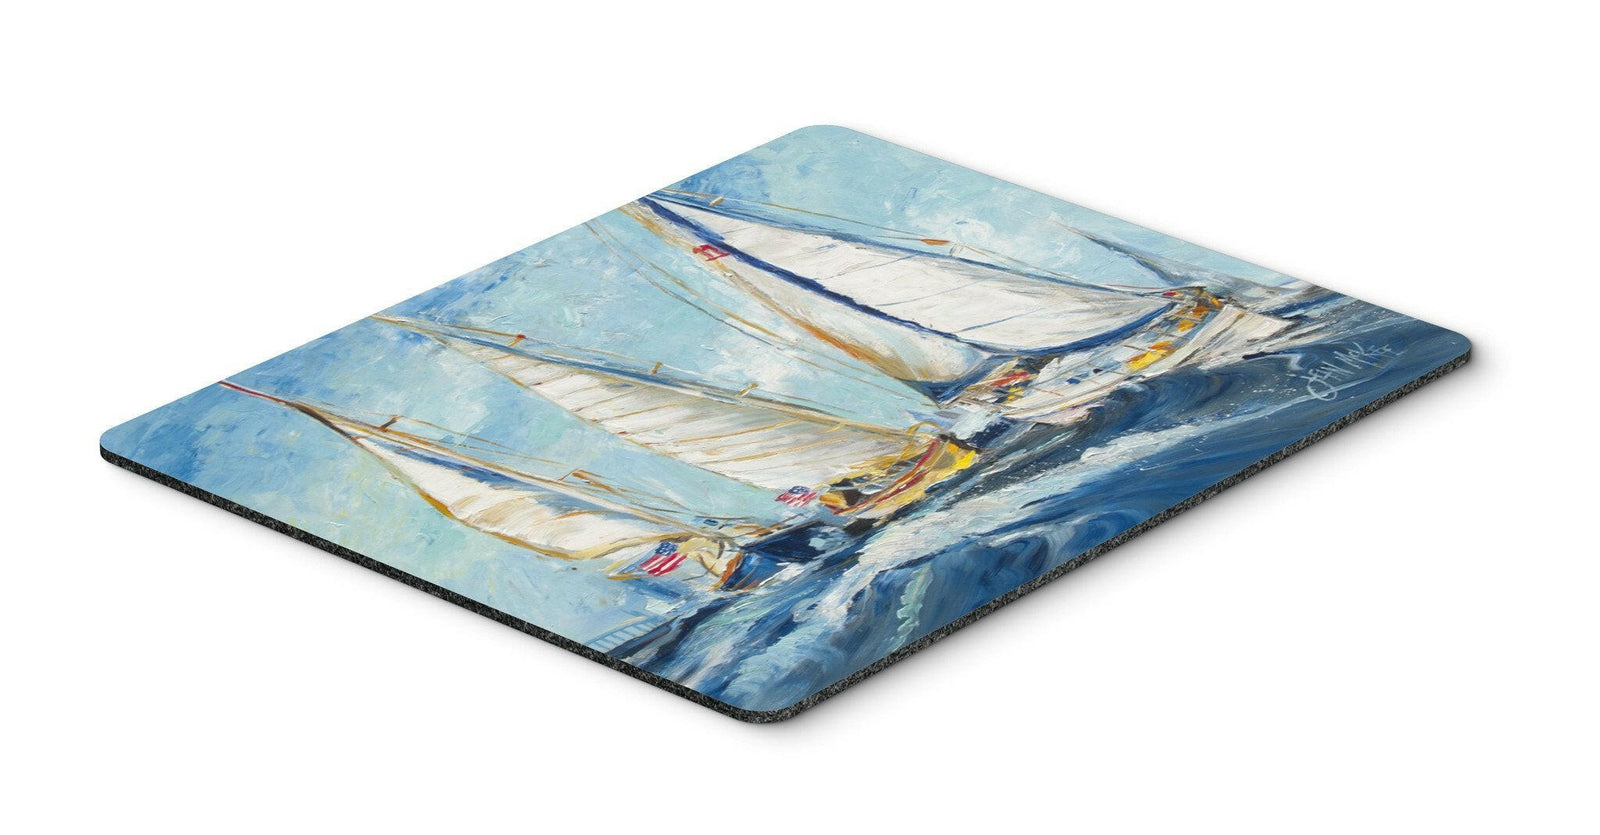 Roll me over Sailboats Mouse Pad, Hot Pad or Trivet JMK1027MP by Caroline's Treasures